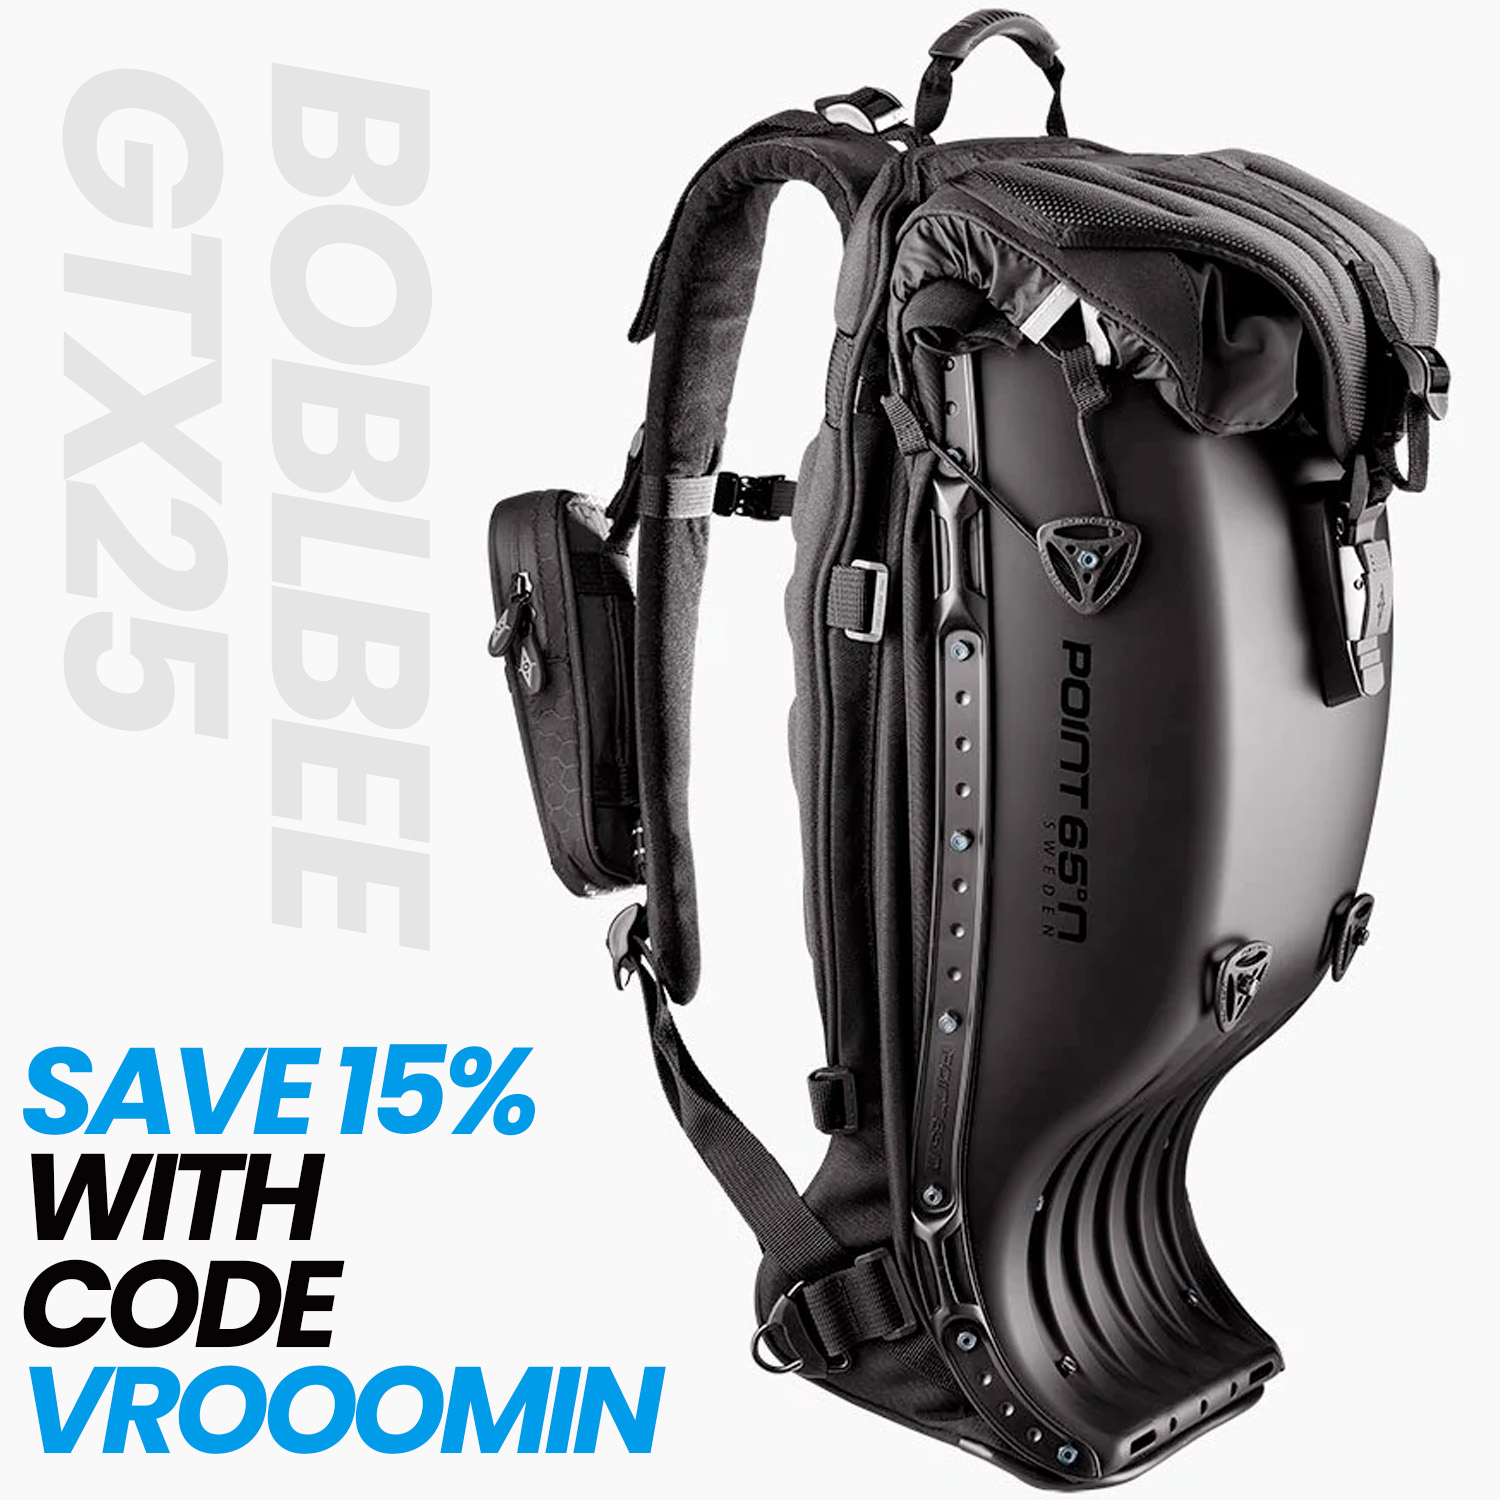 Save 15% off BOBLBEE Back Pack